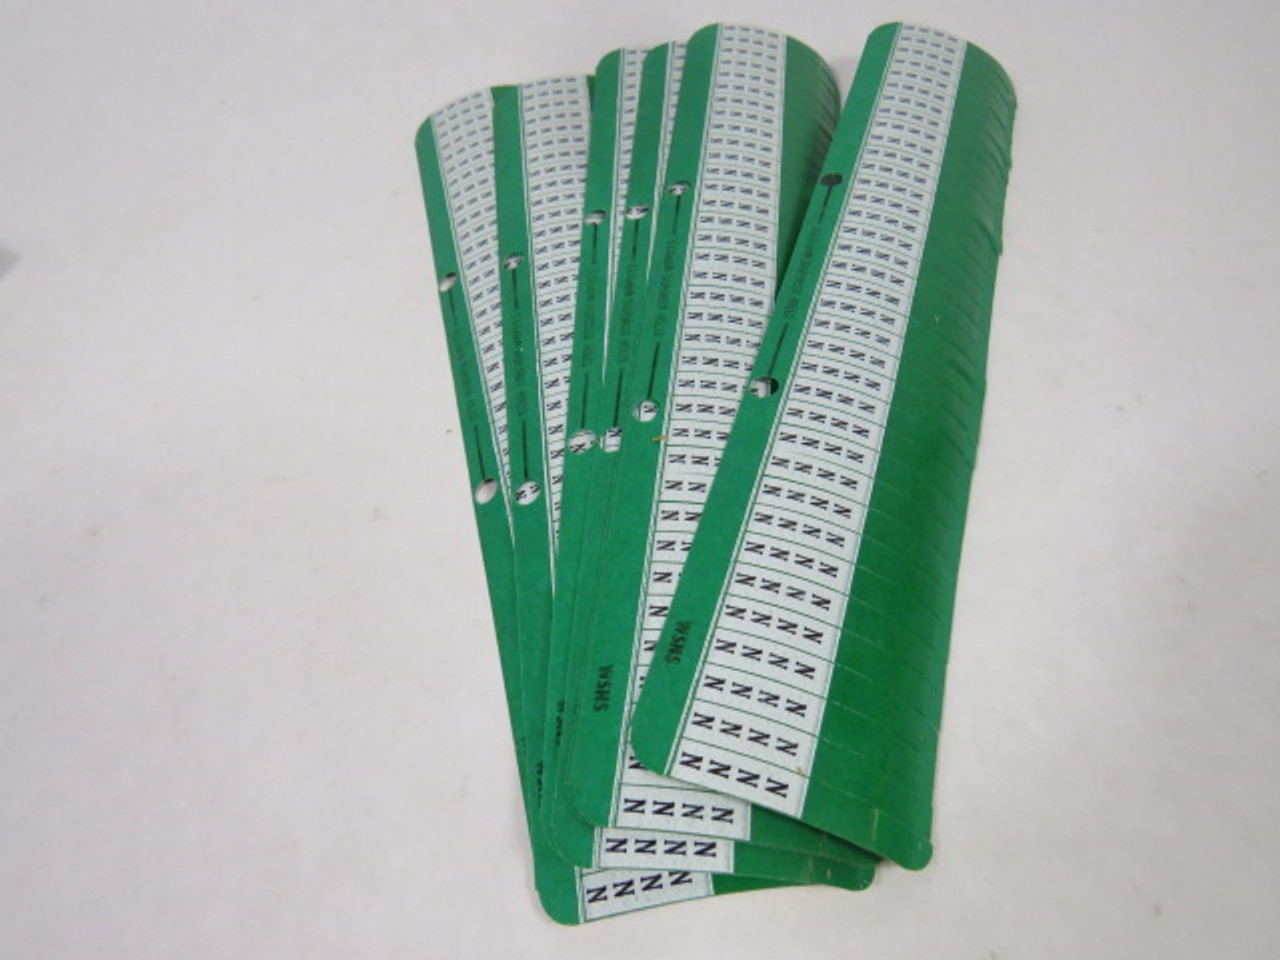 Thomas & Betts N Green E-Z-Code Wire Markers Lot of 8 ! NEW !